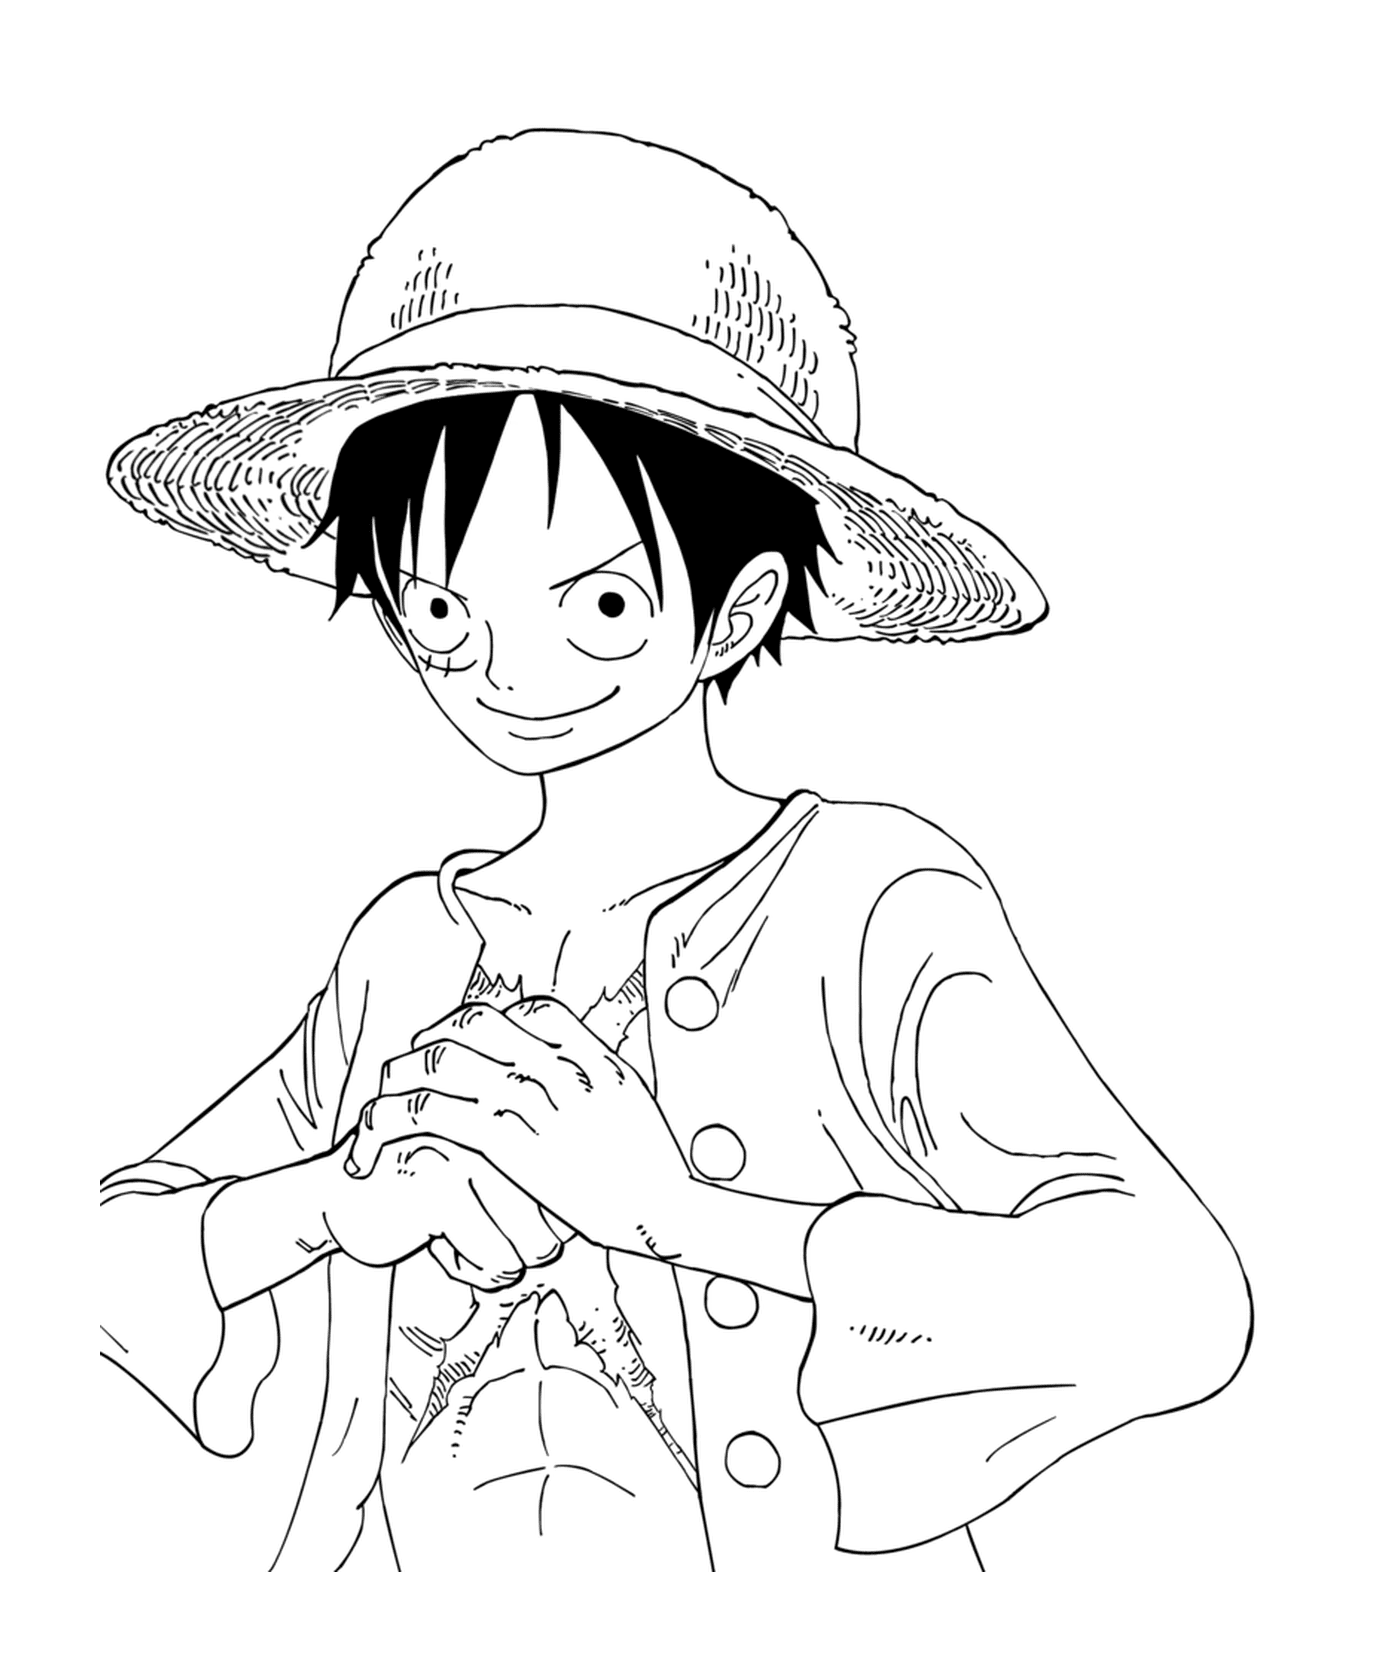  Luffy think, smile confident 